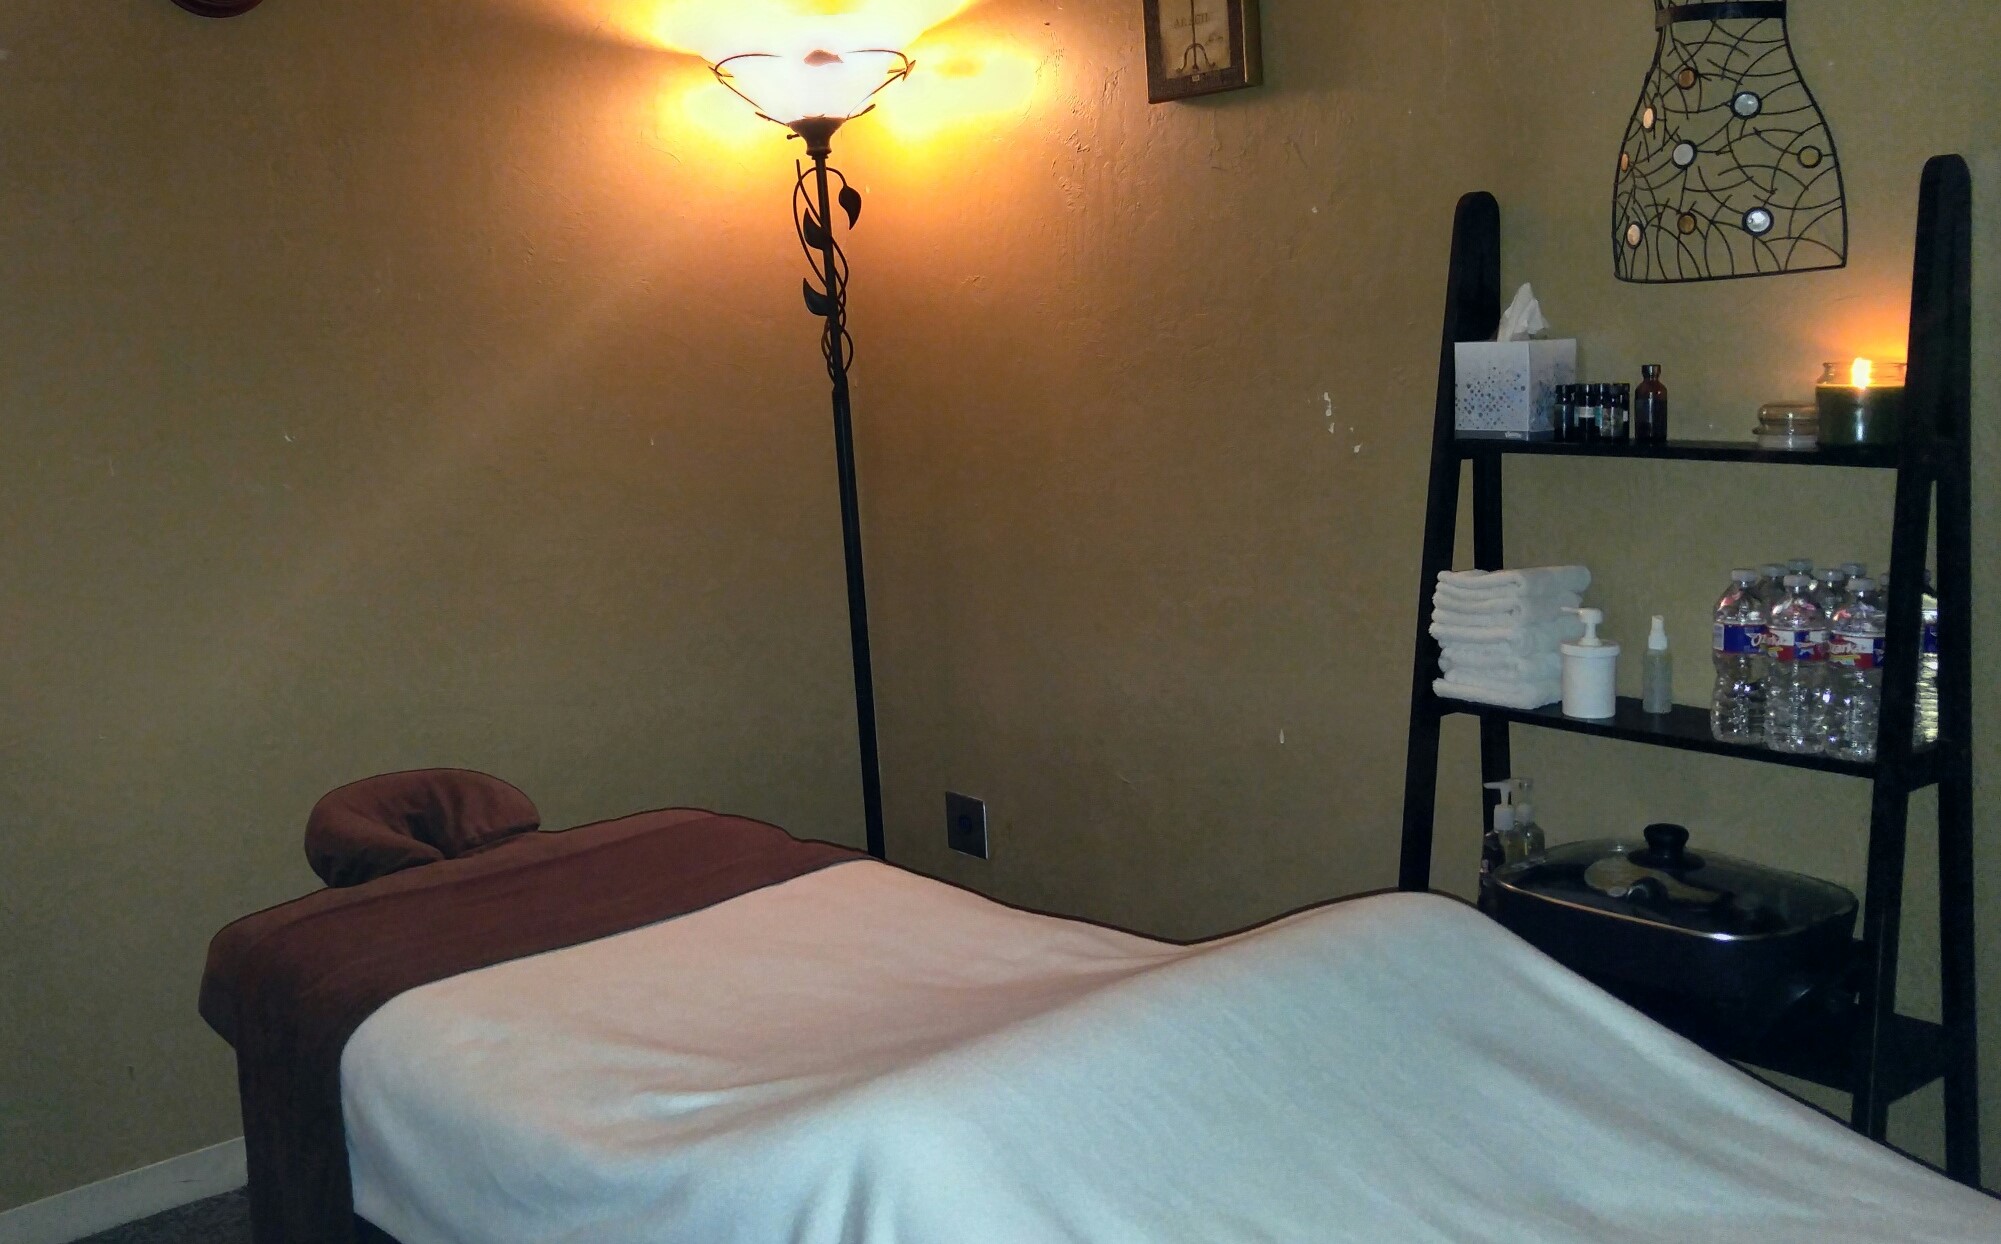 Massage Therapy And Relaxation 1413 S Boulevard Suite 5 Edmond Ok 73034